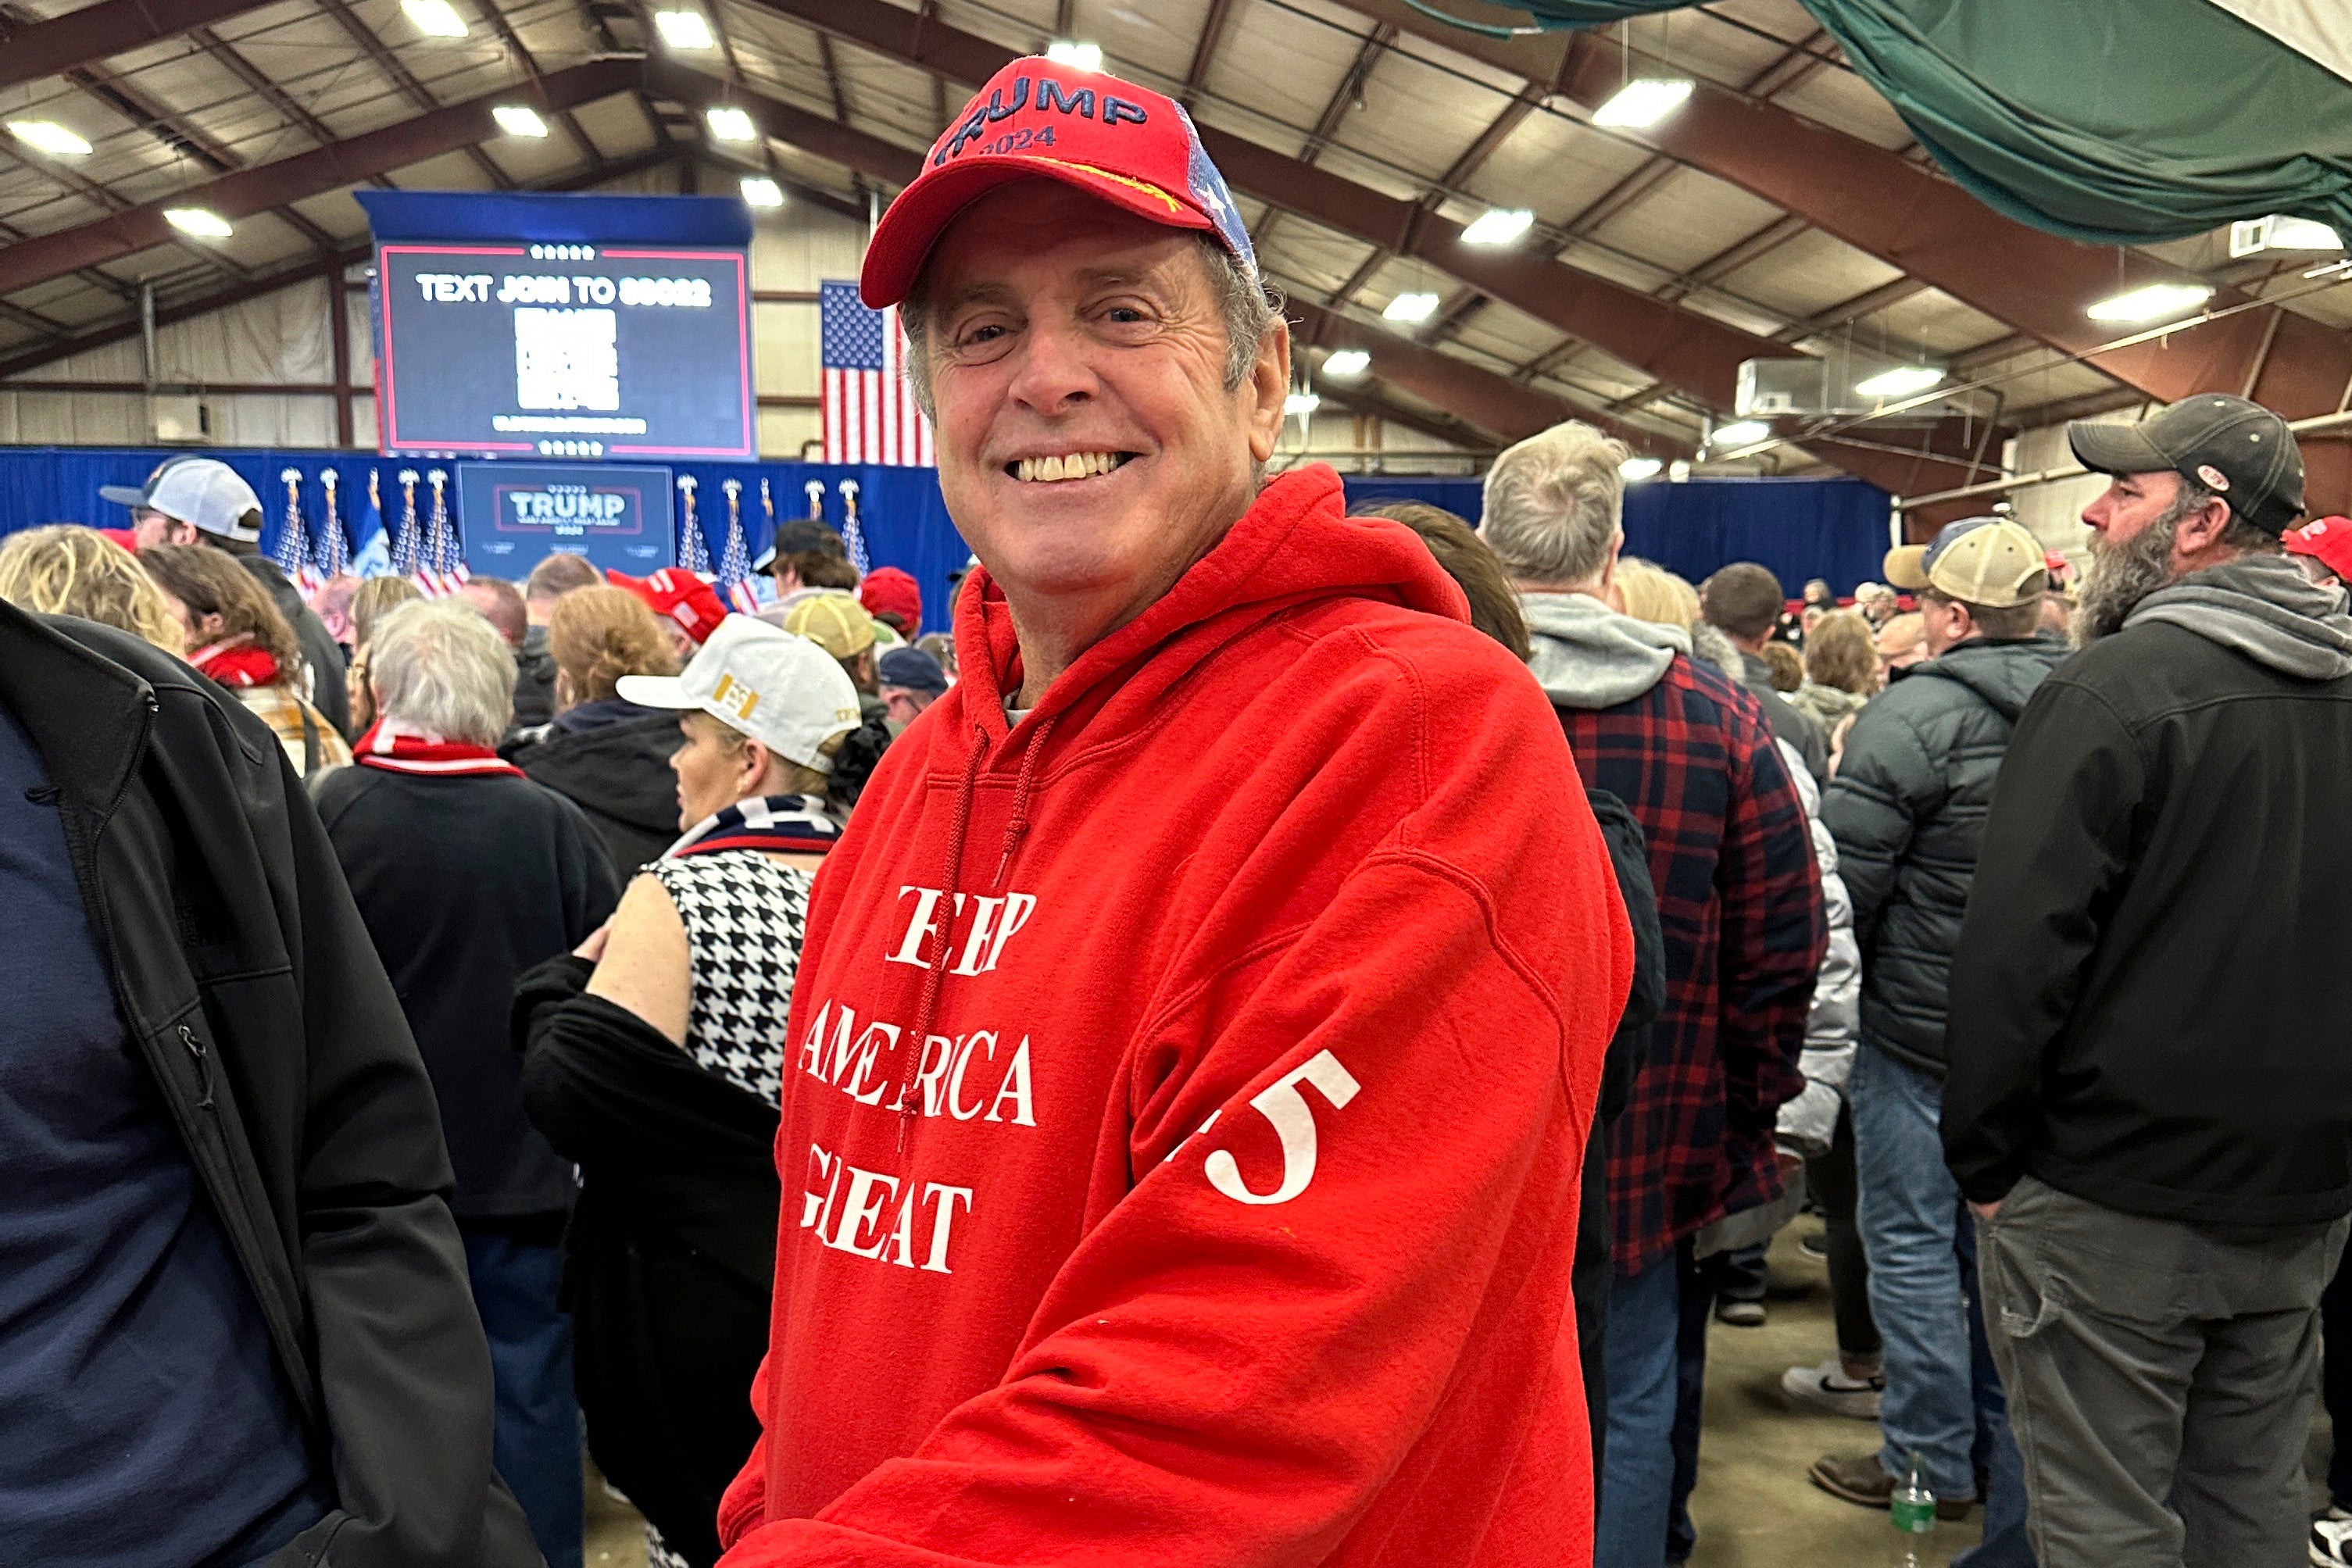 Greg Jennings poses for a photo before a rally for Republican presidential candidate former President Donald Trump in Mason City, Iowa